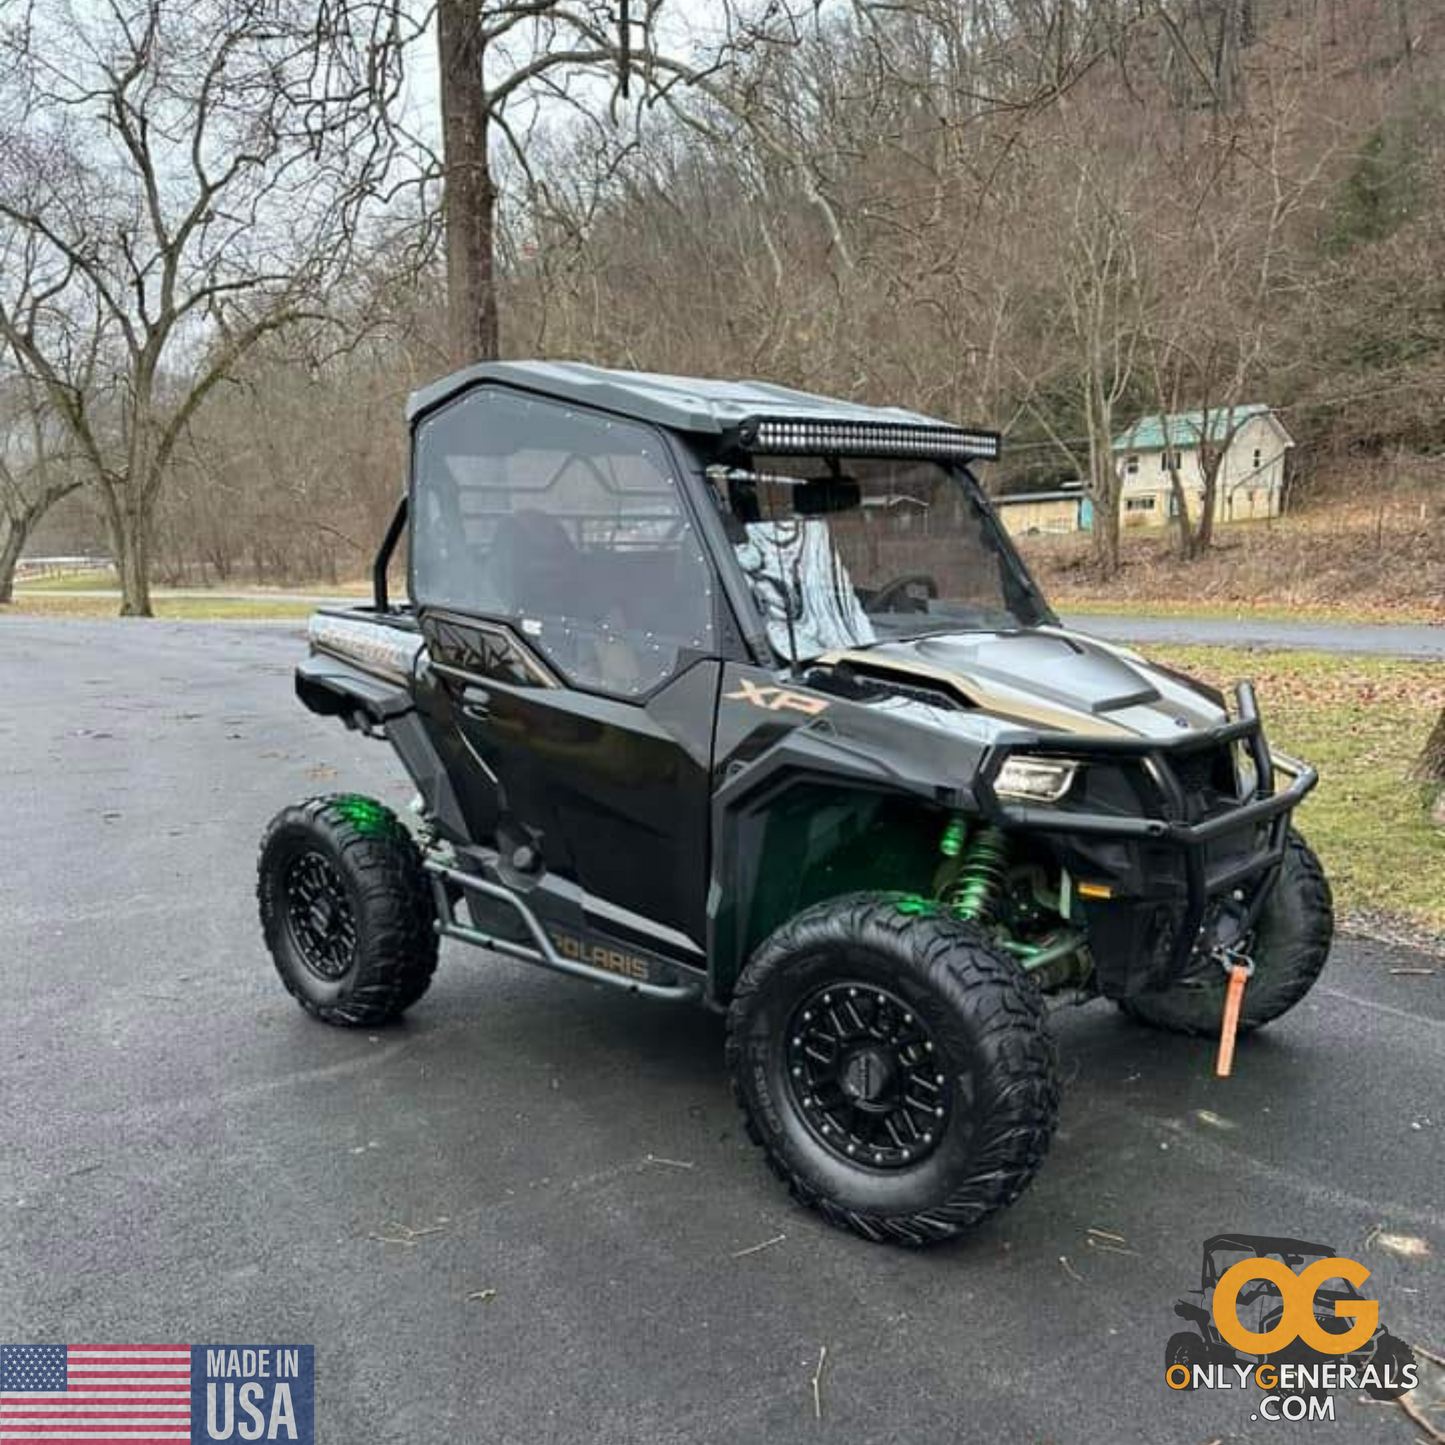 Customer submitted photo with a Polaris General with green rock lights showing off their SideskinsLITE hard upper doors from OnlyGenerals